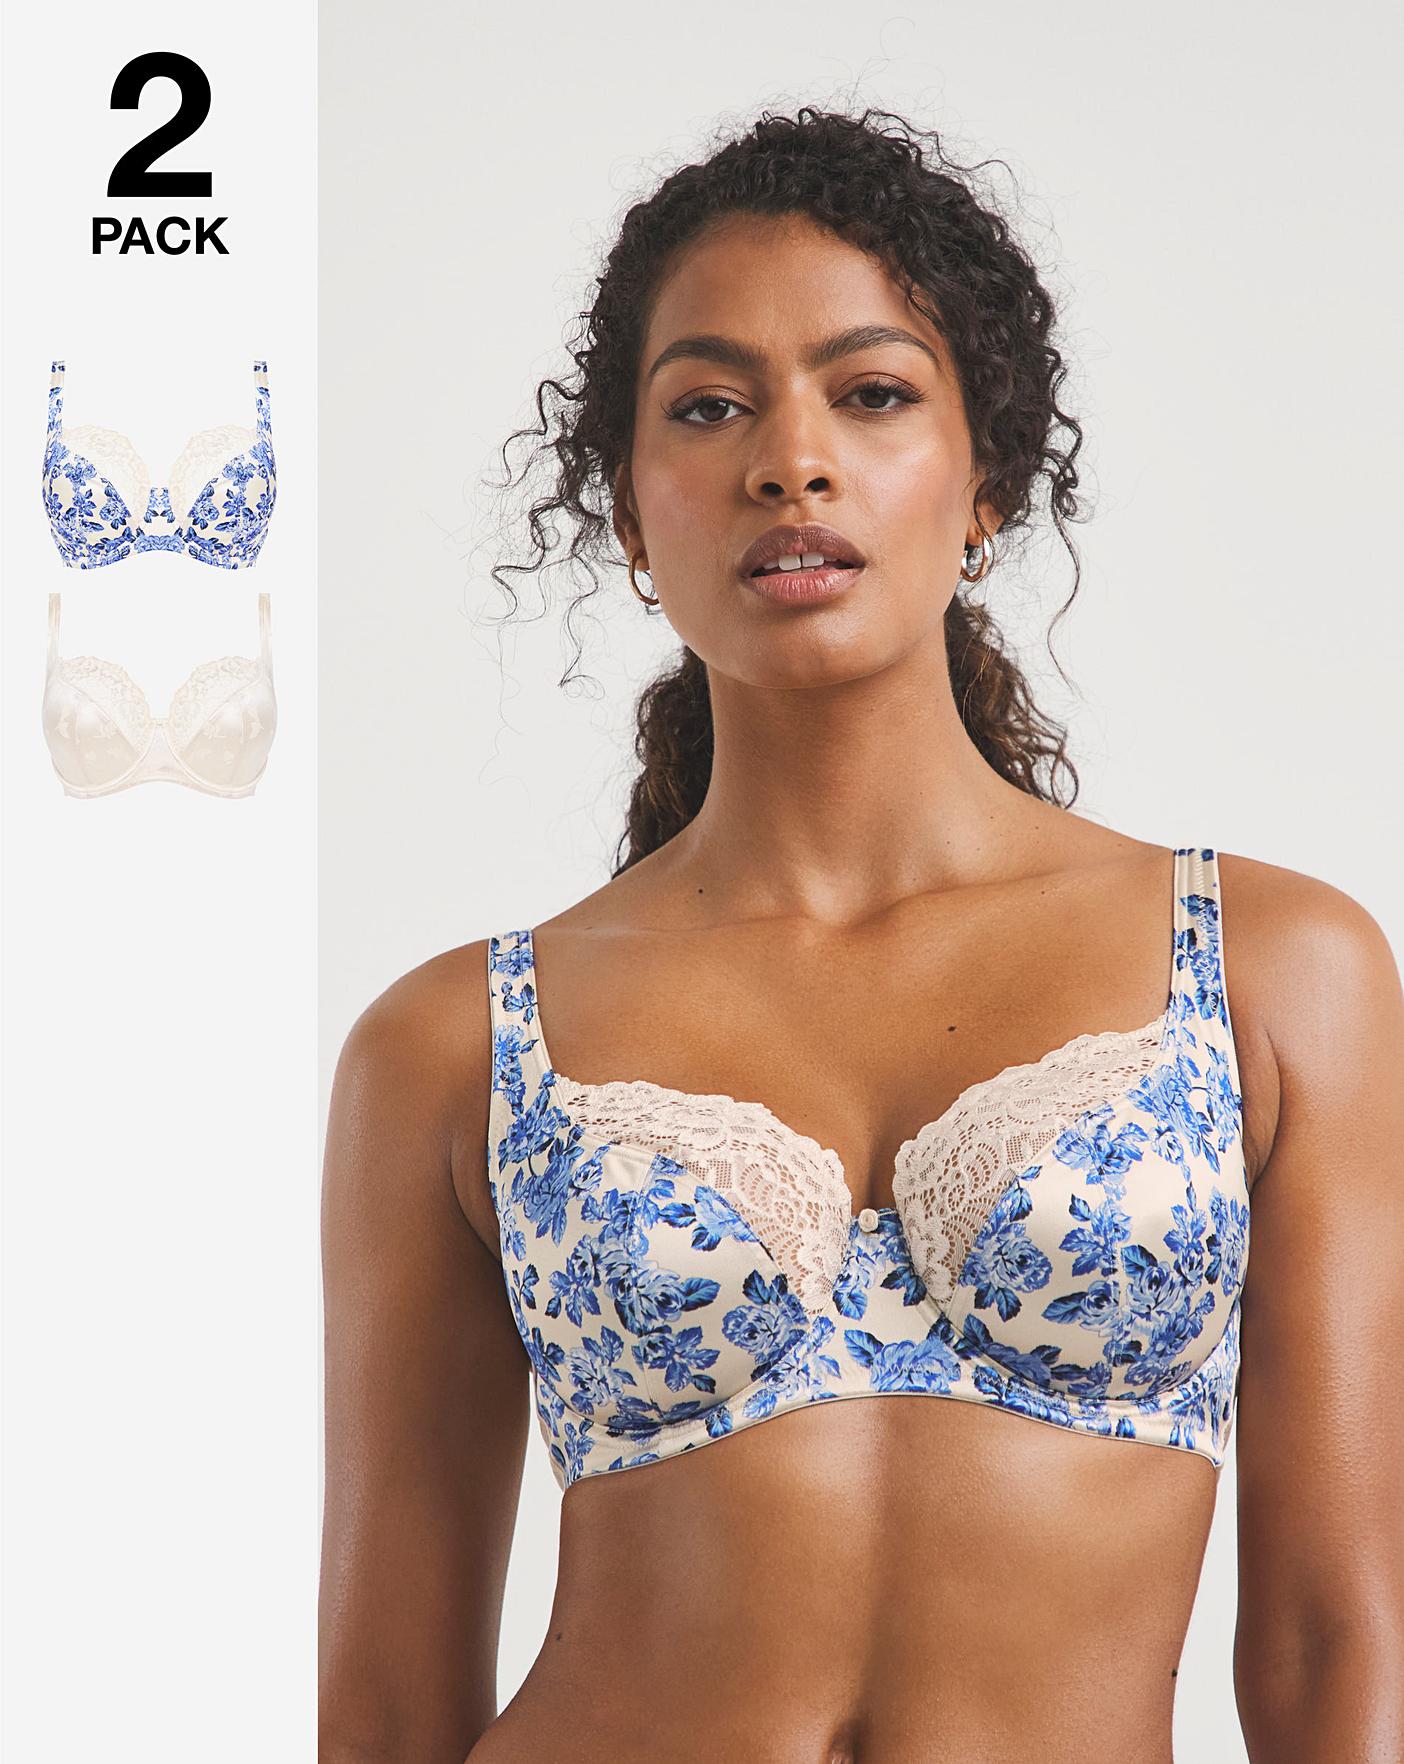 Elegant Lace Bralette for a Delicate Look